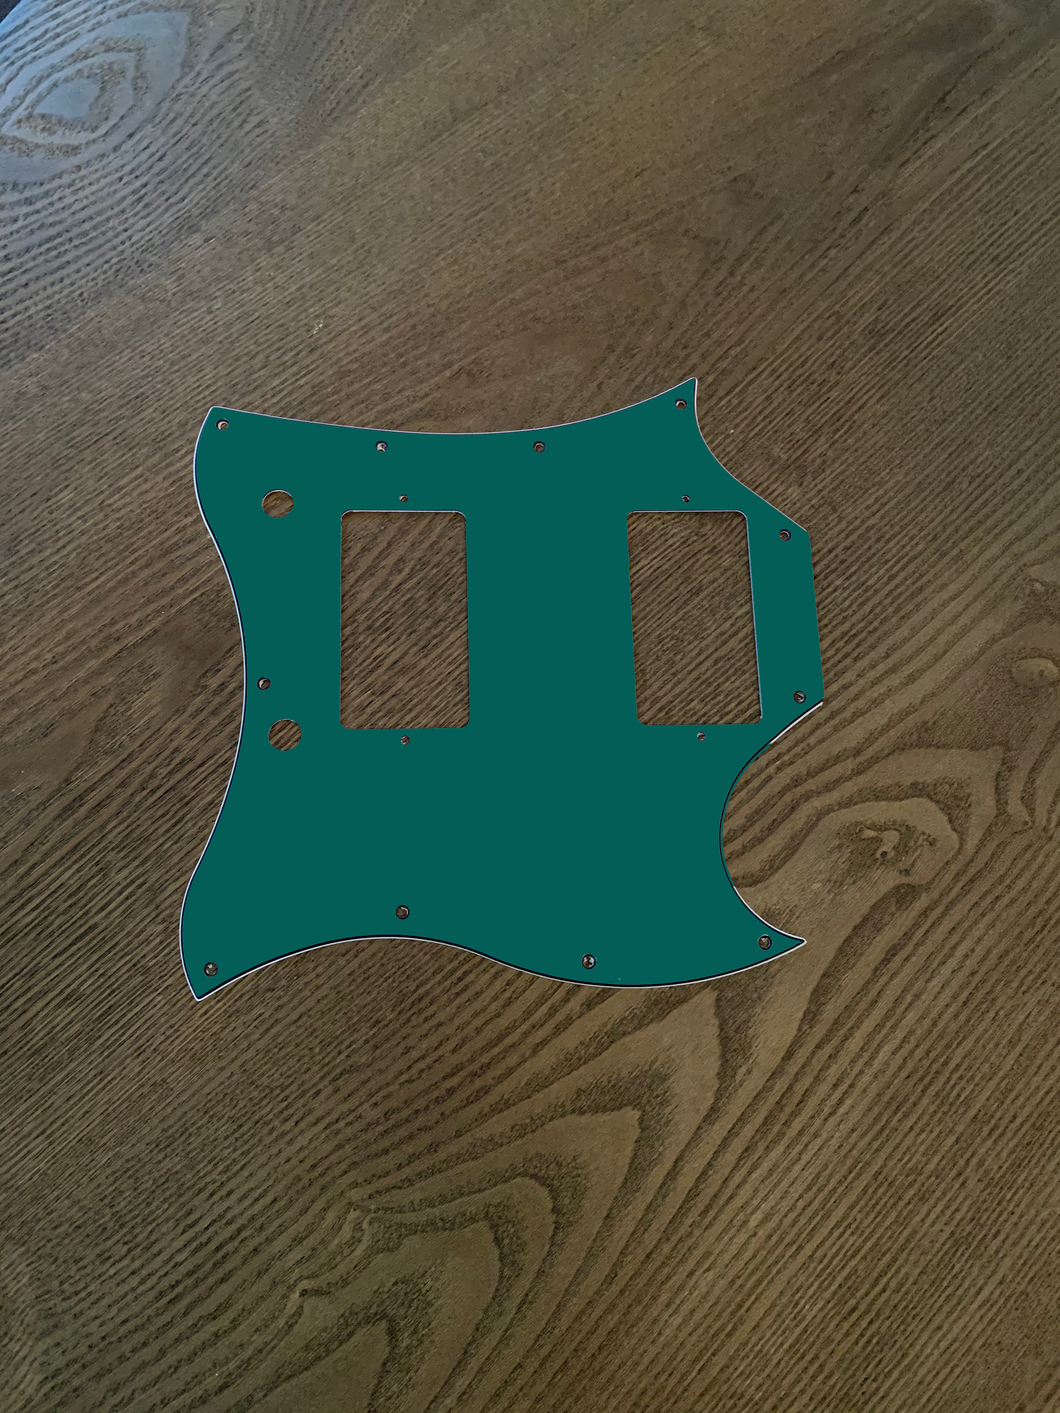 Deep Turquoise(Matte)-Solid SG Pickguard by Carmedon